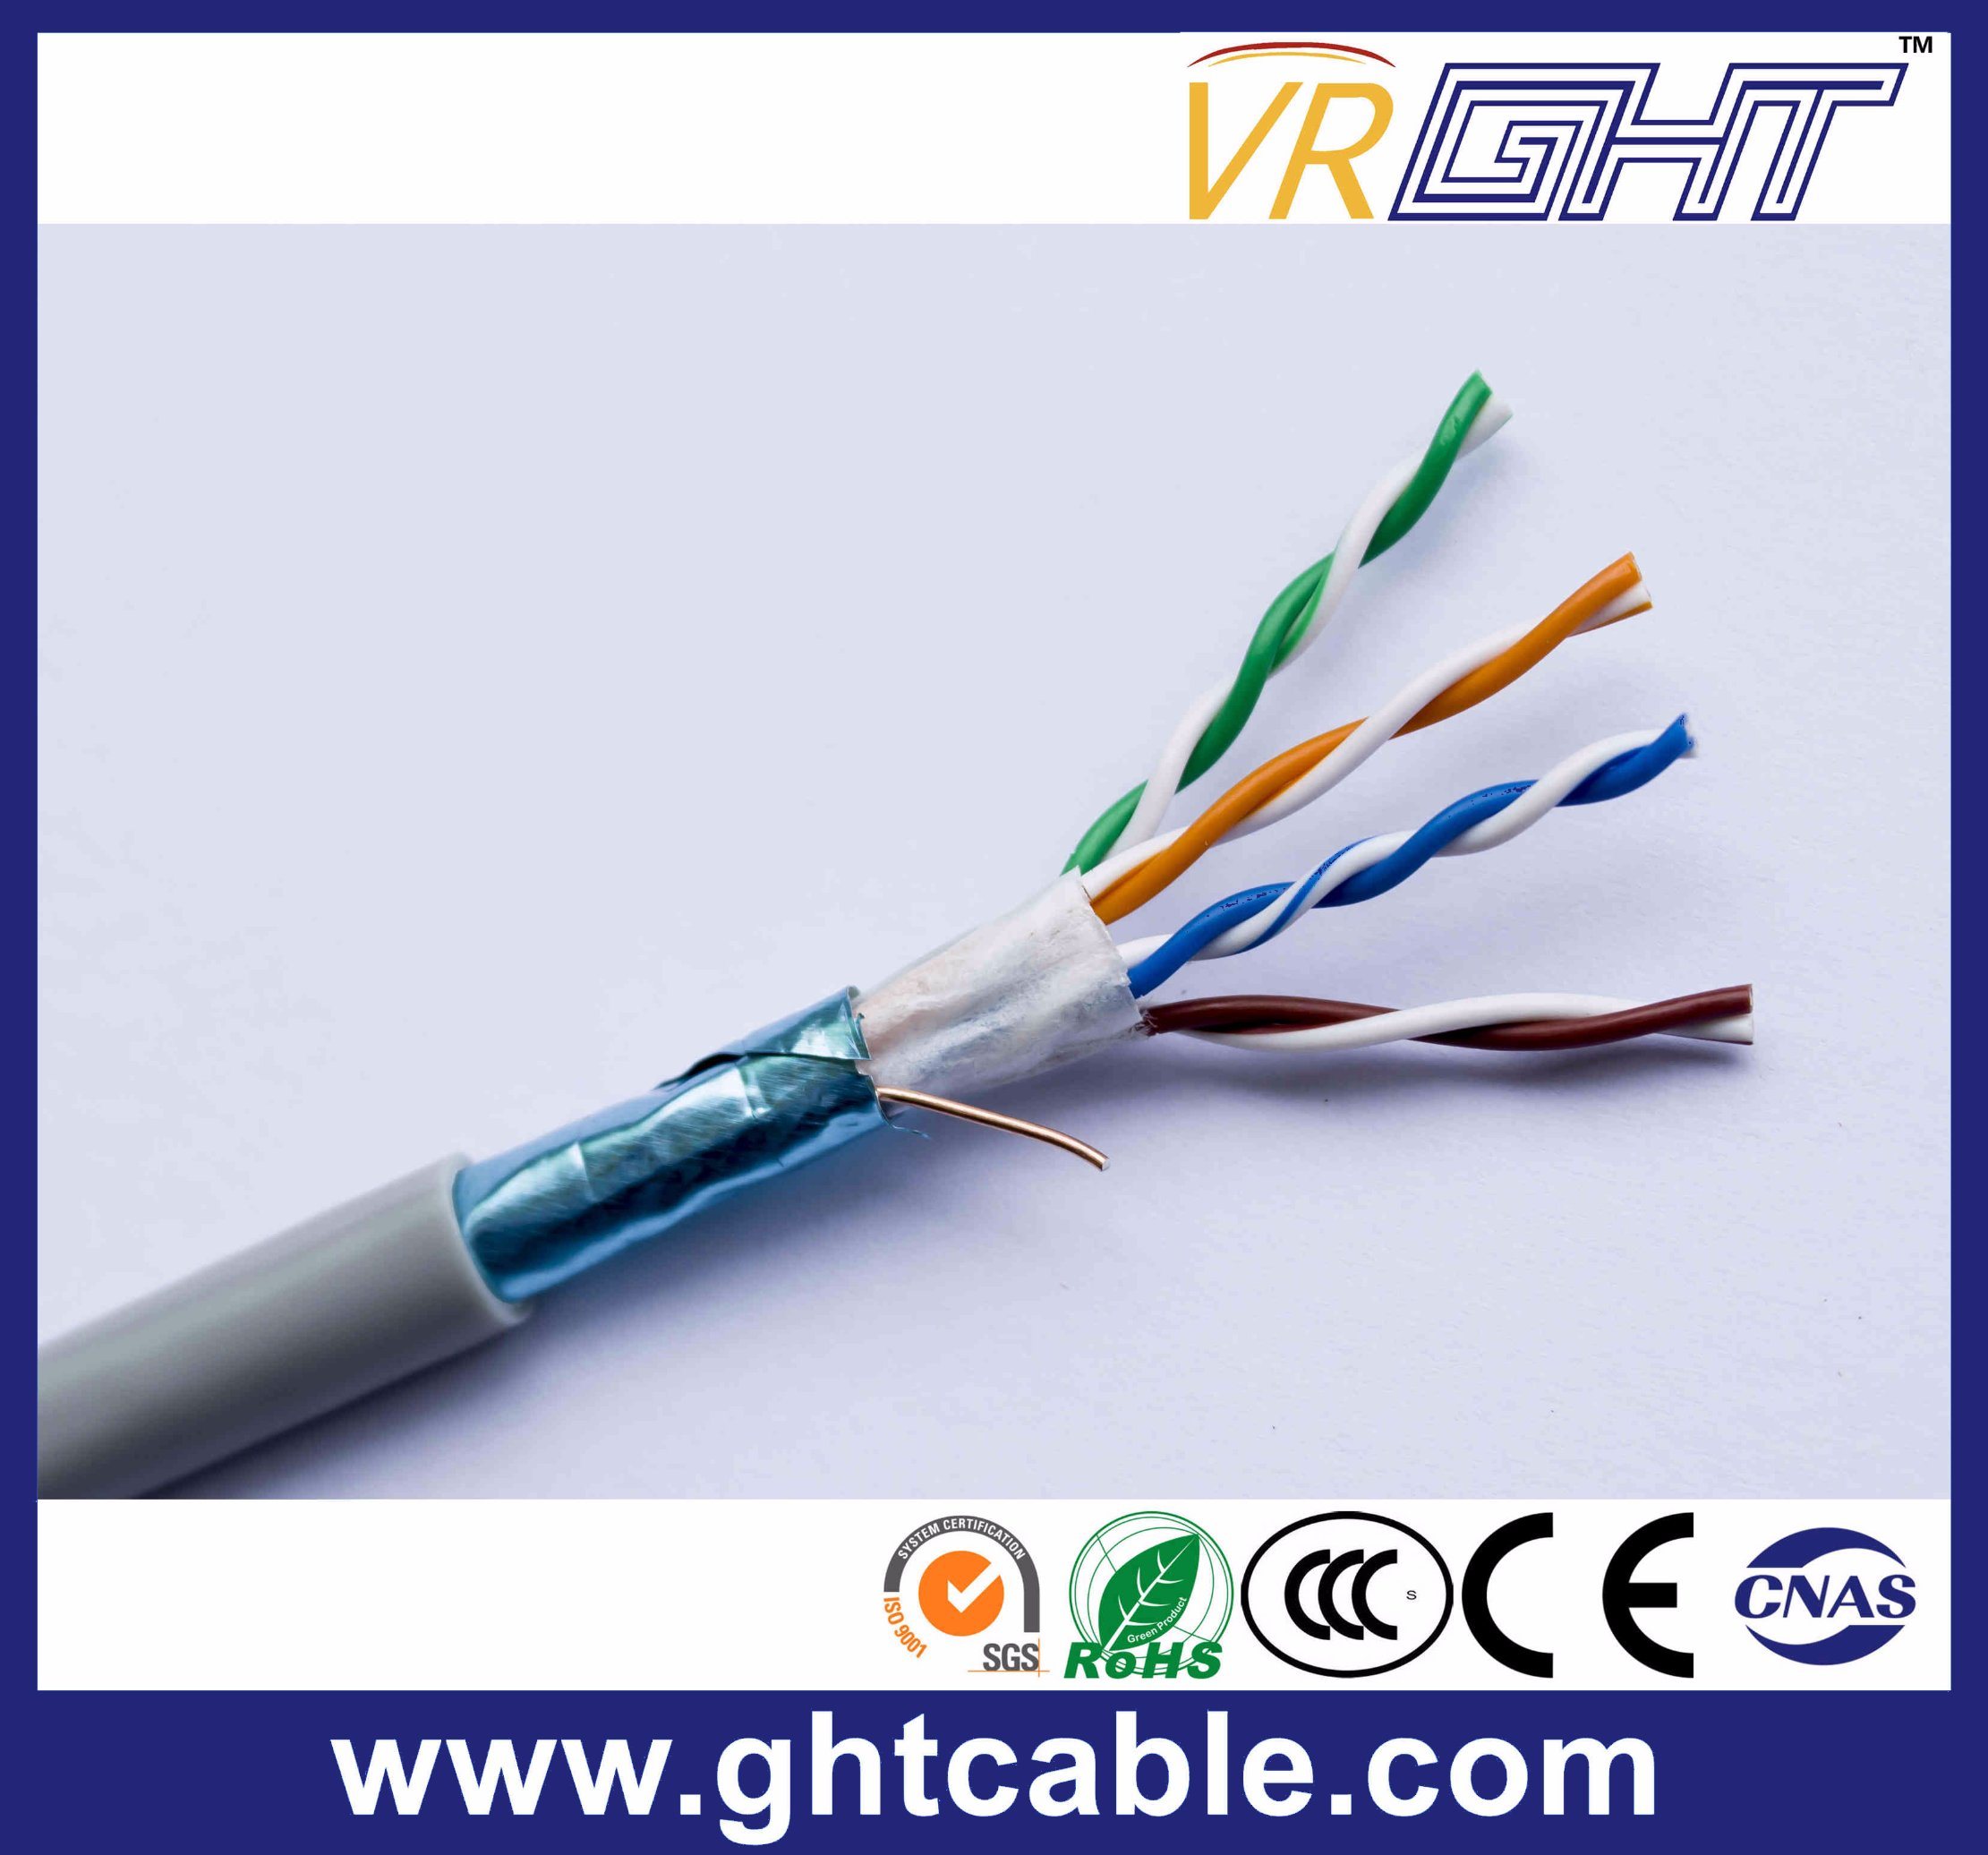 Indoor Cat5/ Cat5e FTP 24AWG Copper Conductor LAN Cable